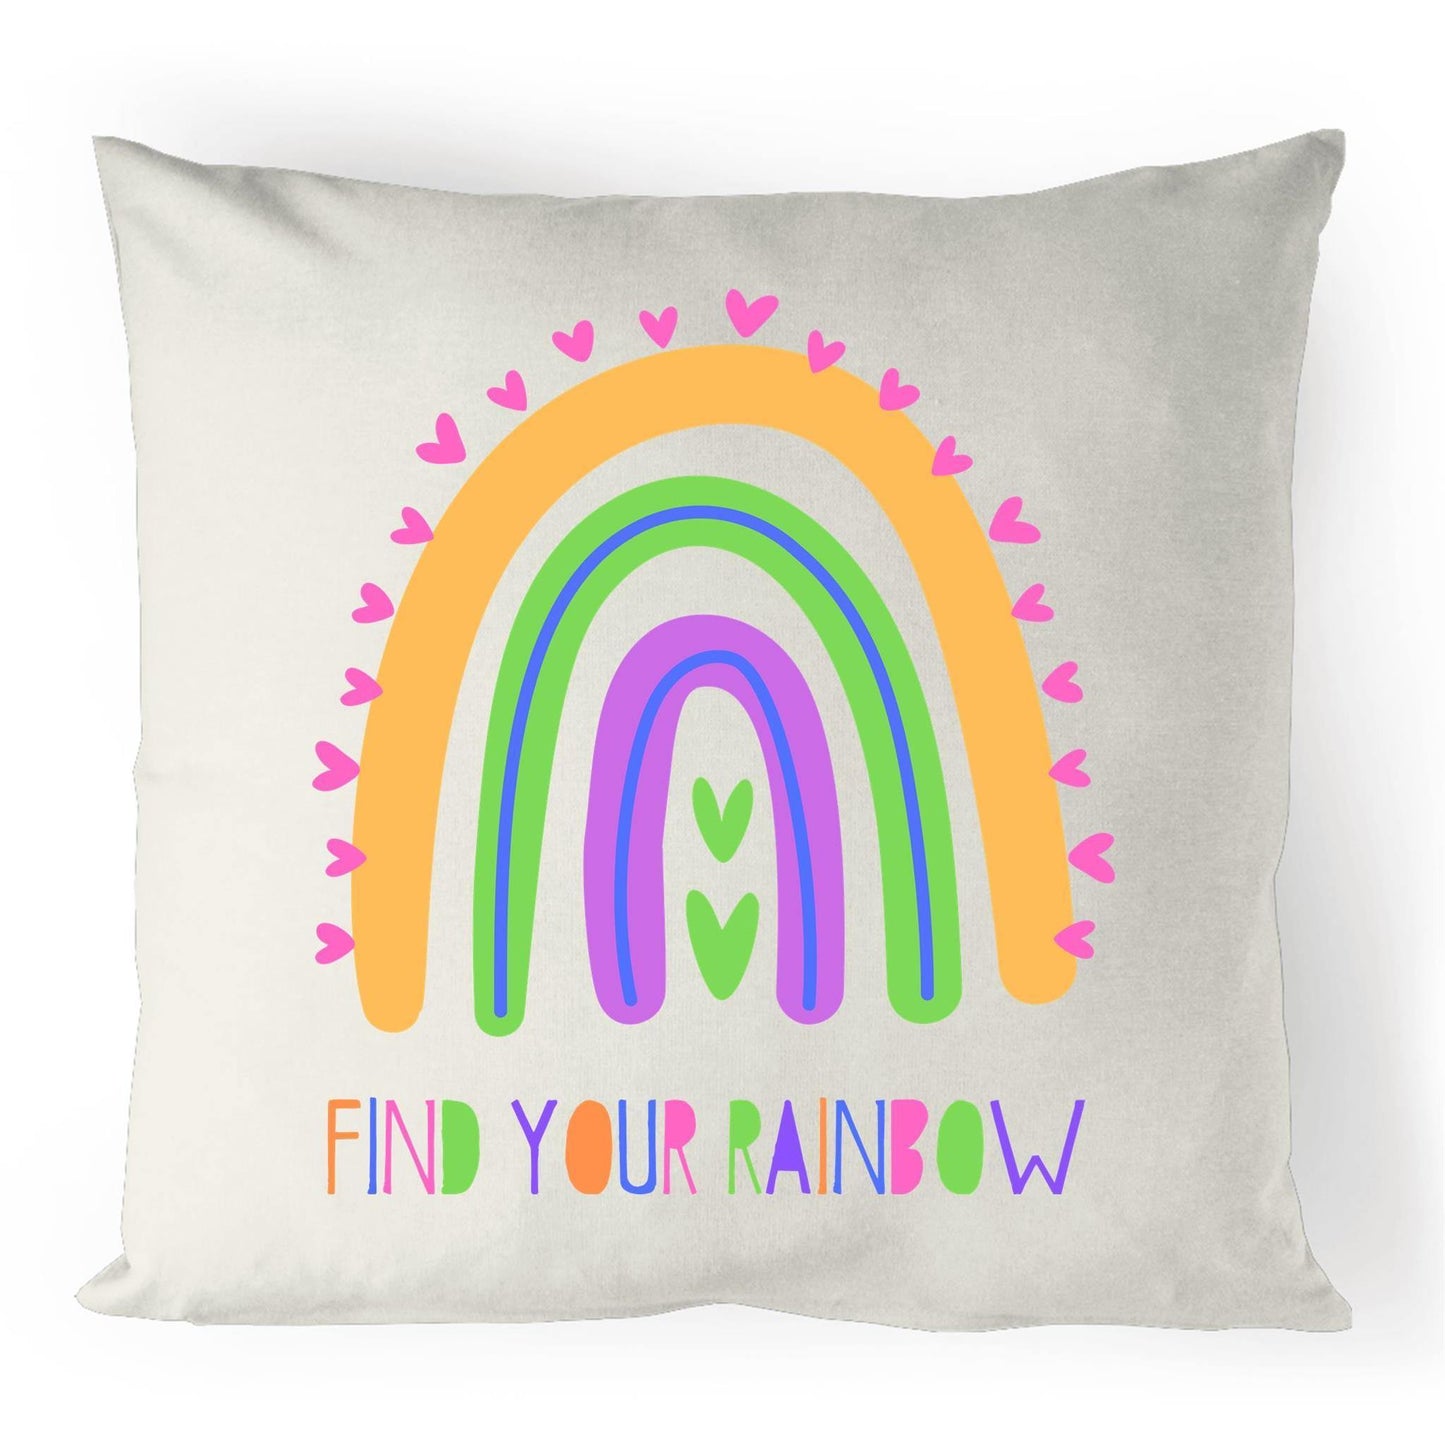 Find Your Rainbow - 100% Linen Cushion Cover Natural One-Size Linen Cushion Cover Kids